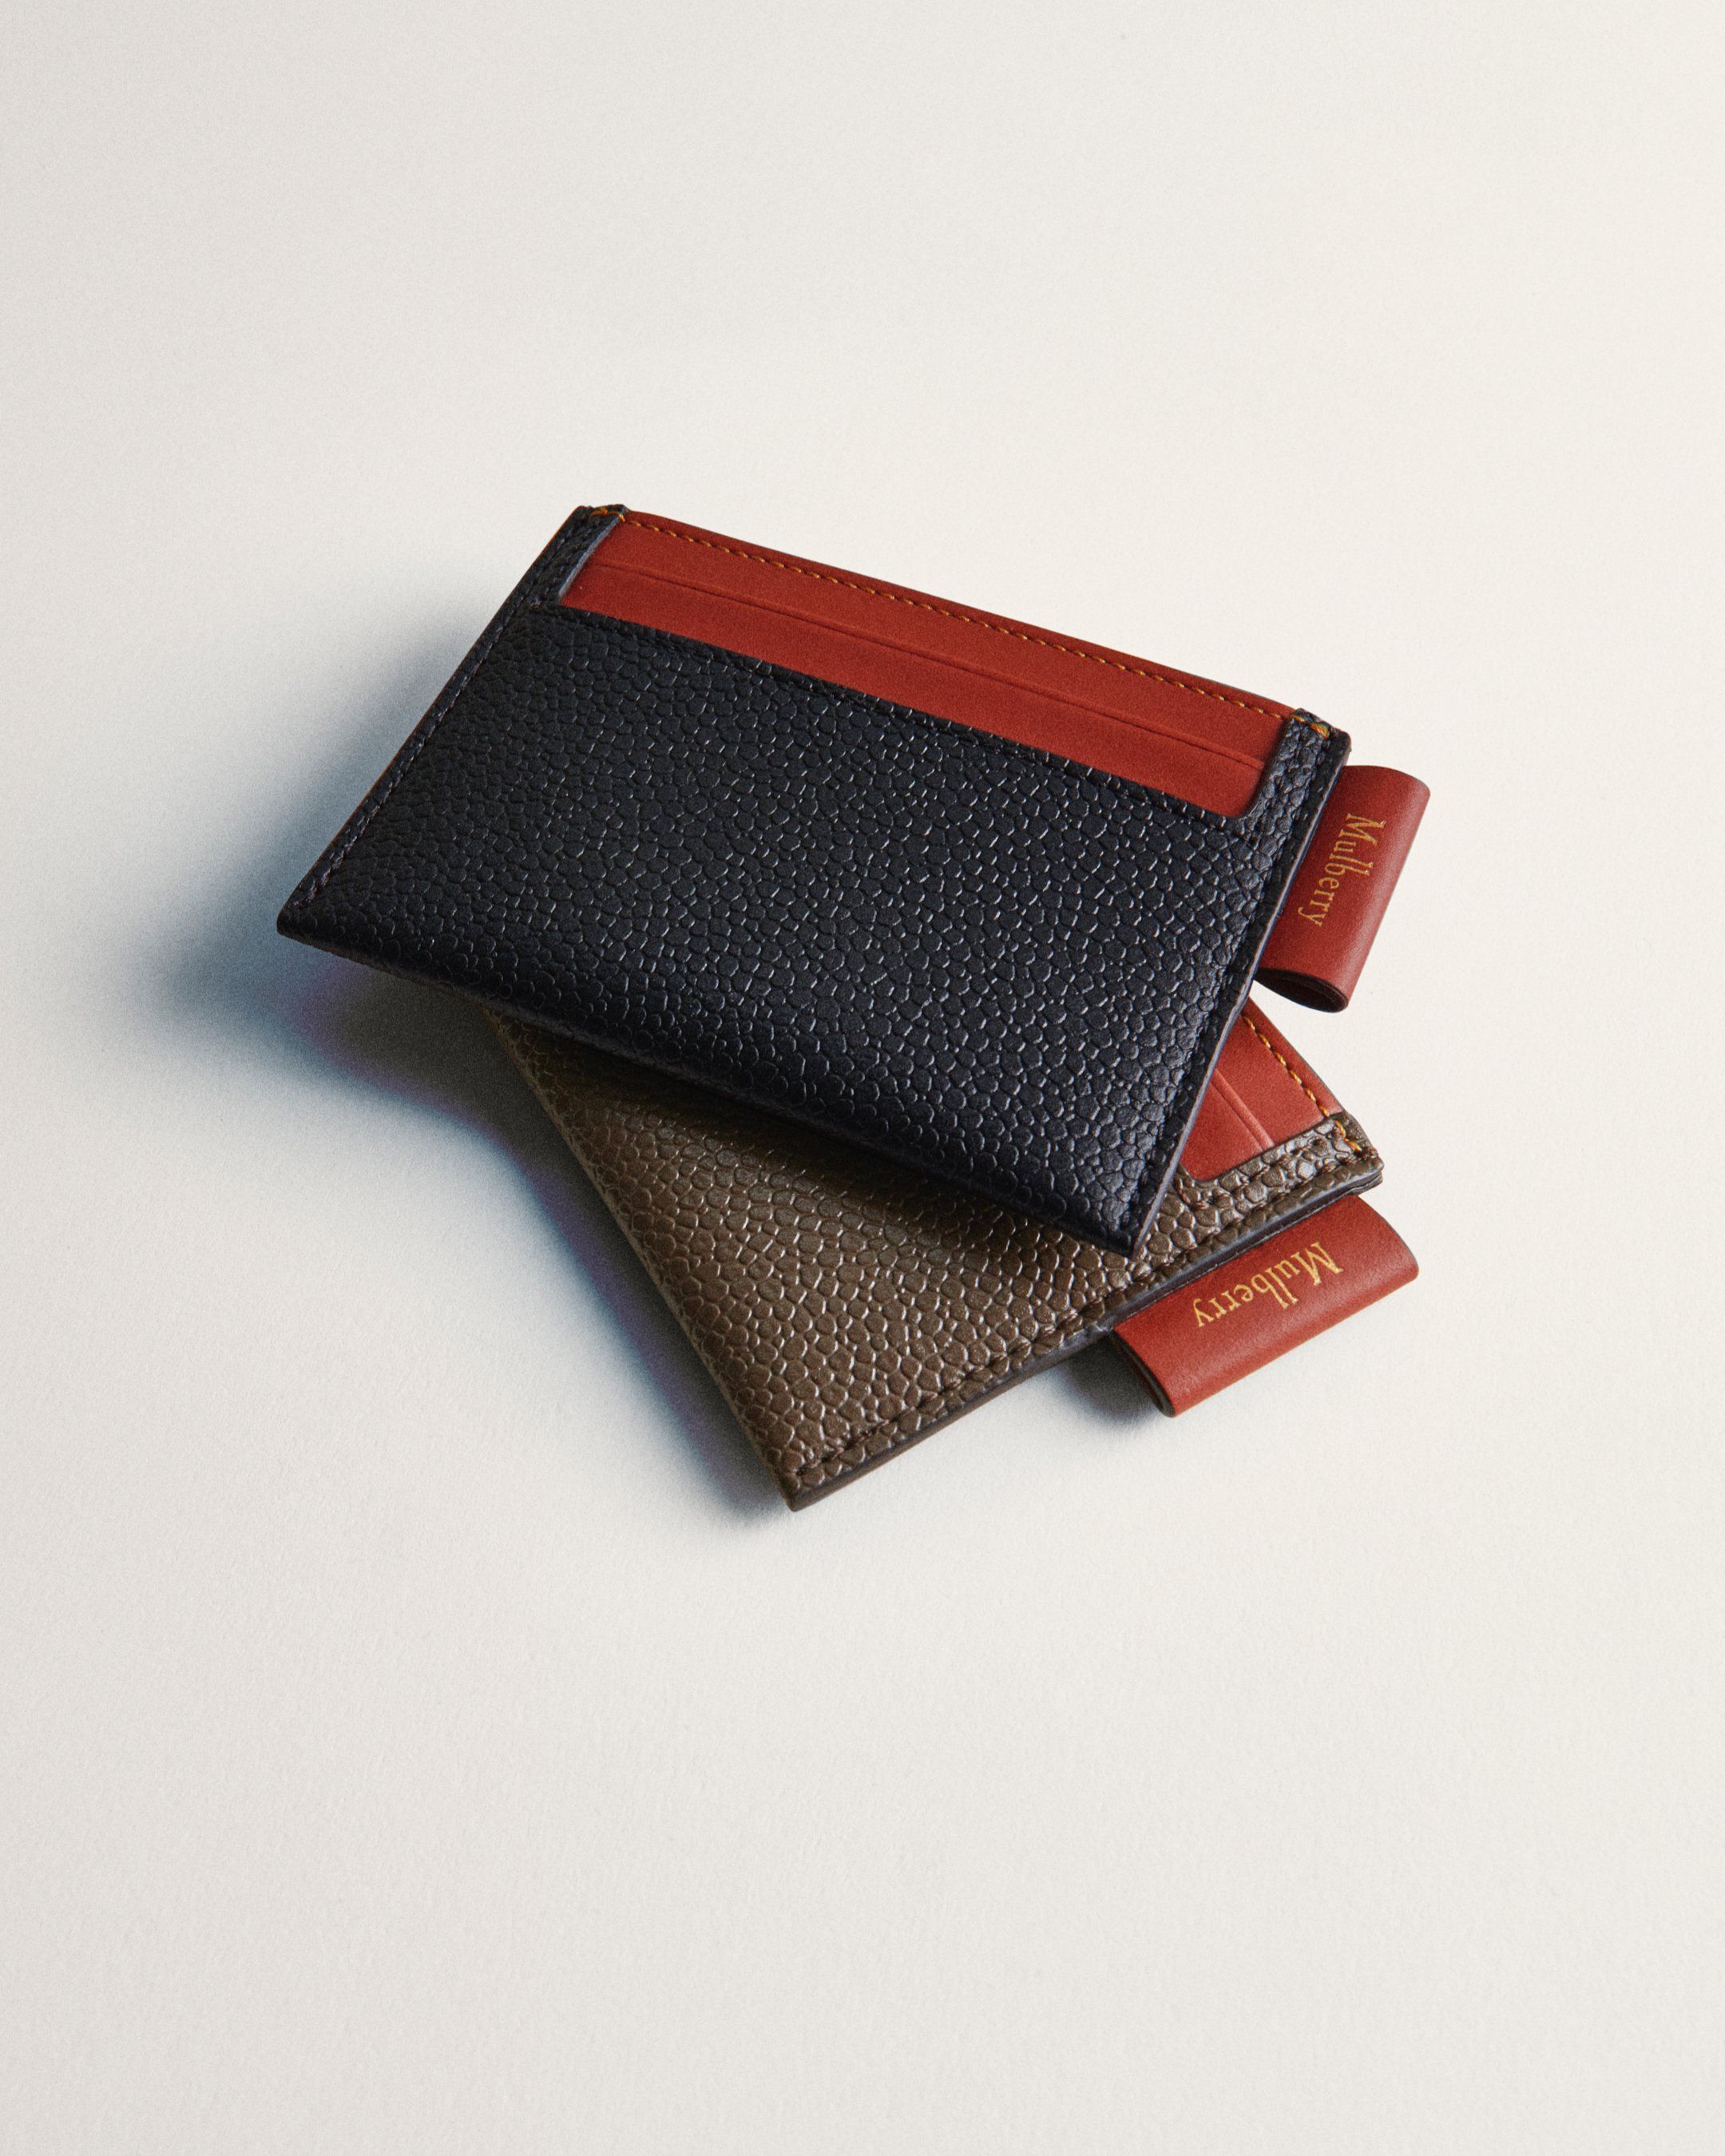 Two Mulberry credit card slips in black and brown leather